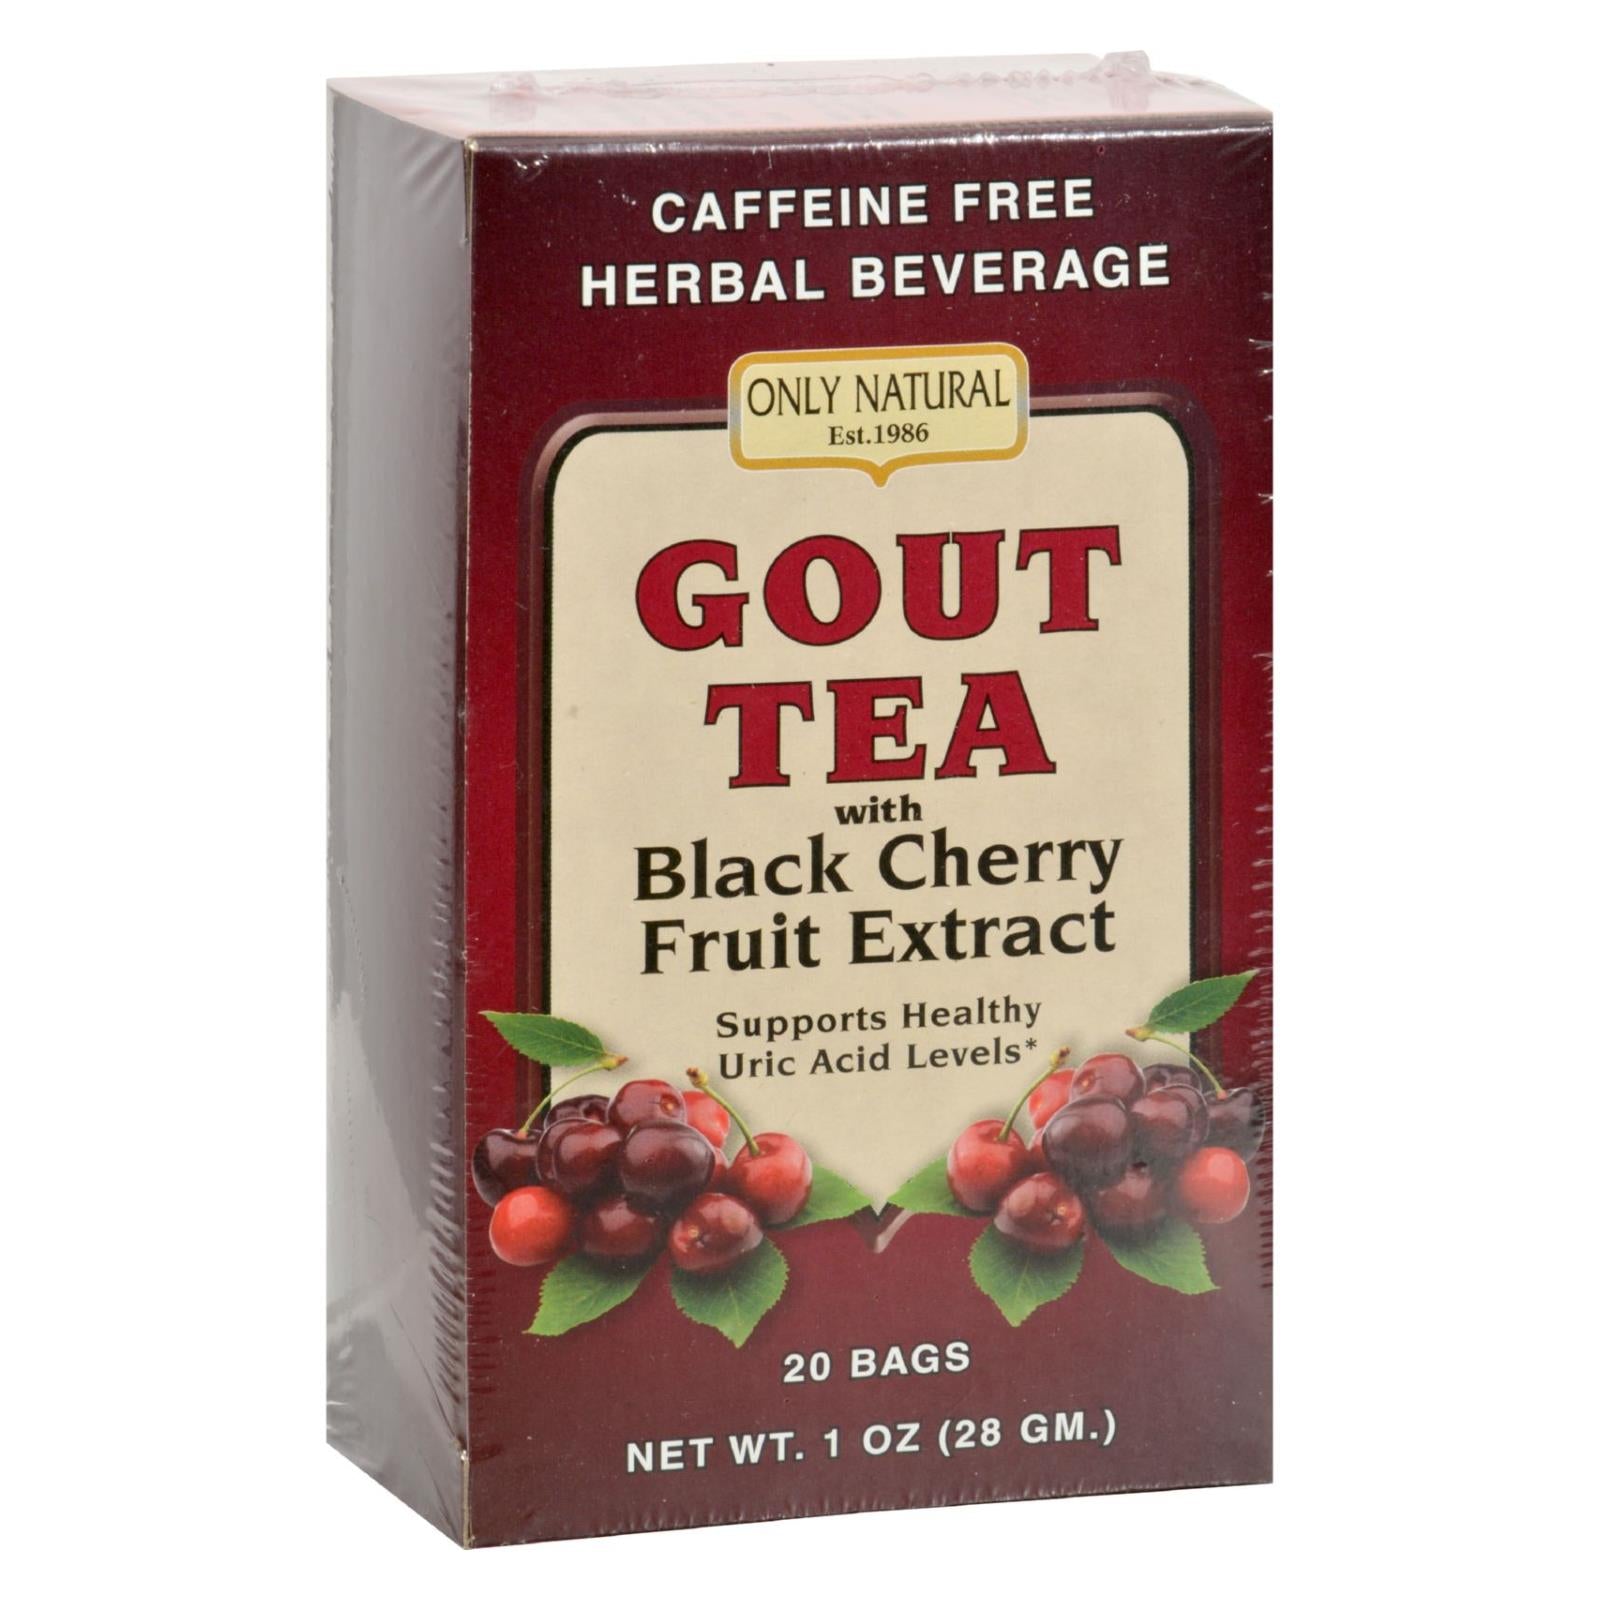 Only Natural Gout Tea - Black Cherry Fruit Extract - 20 Bags